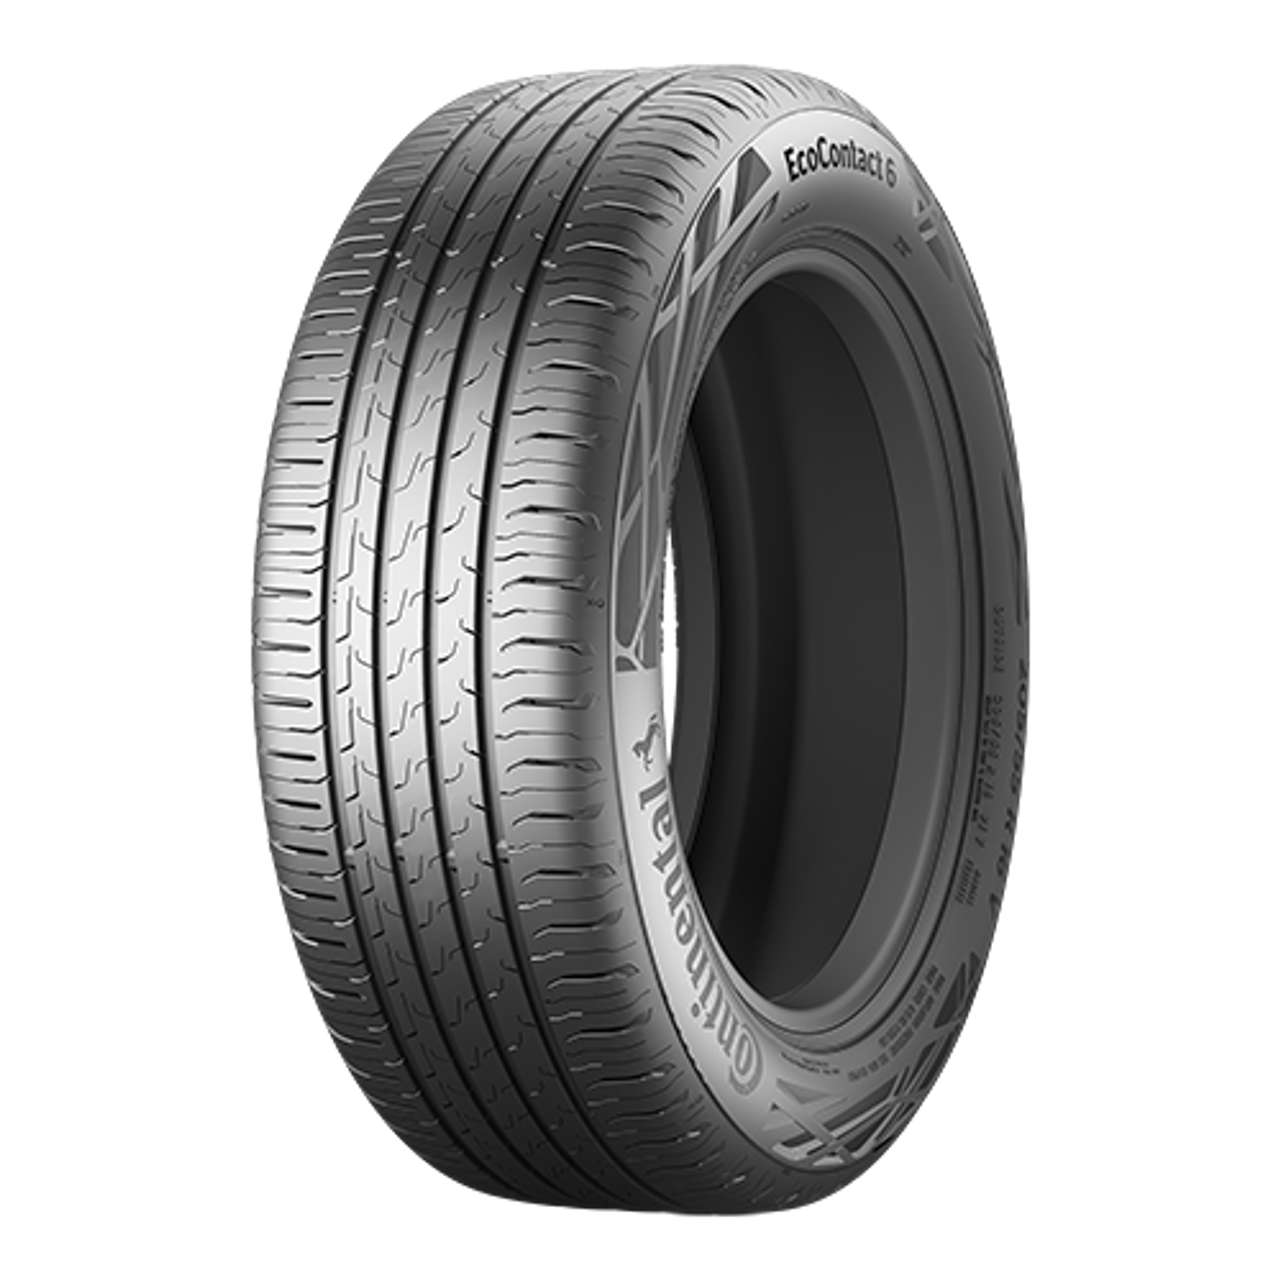 CONTINENTAL ECOCONTACT 6 (*) (EVc) 205/55R16 91W BSW